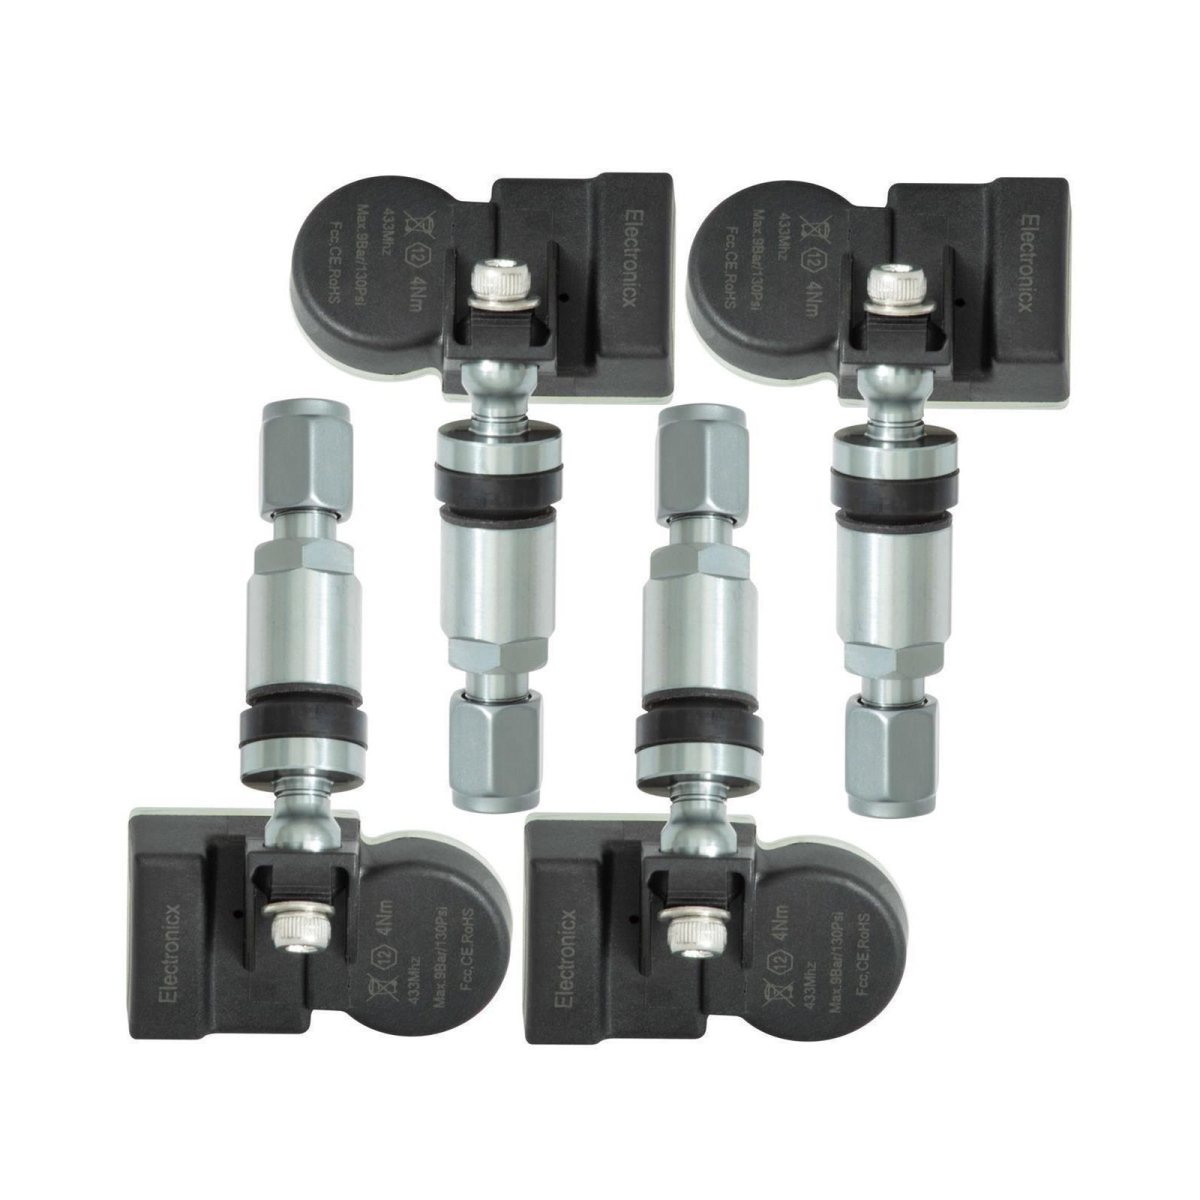 4x TPMS tire pressure sensors metal valve Darkgrey for VW Crafter 2006 to 2014 OE 2E0907508F